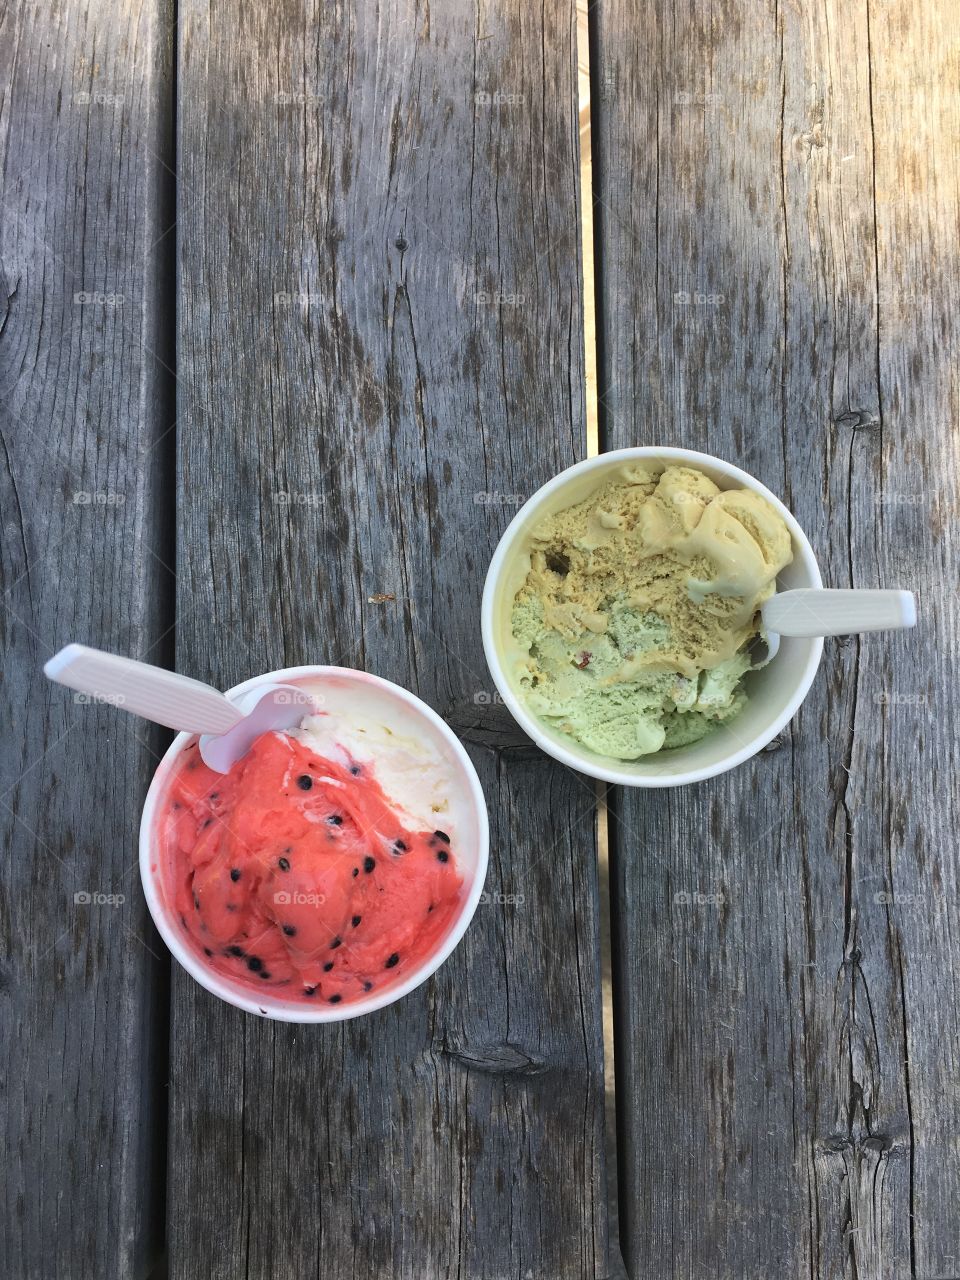 Summertime days. Perfect for sharing ice cream.